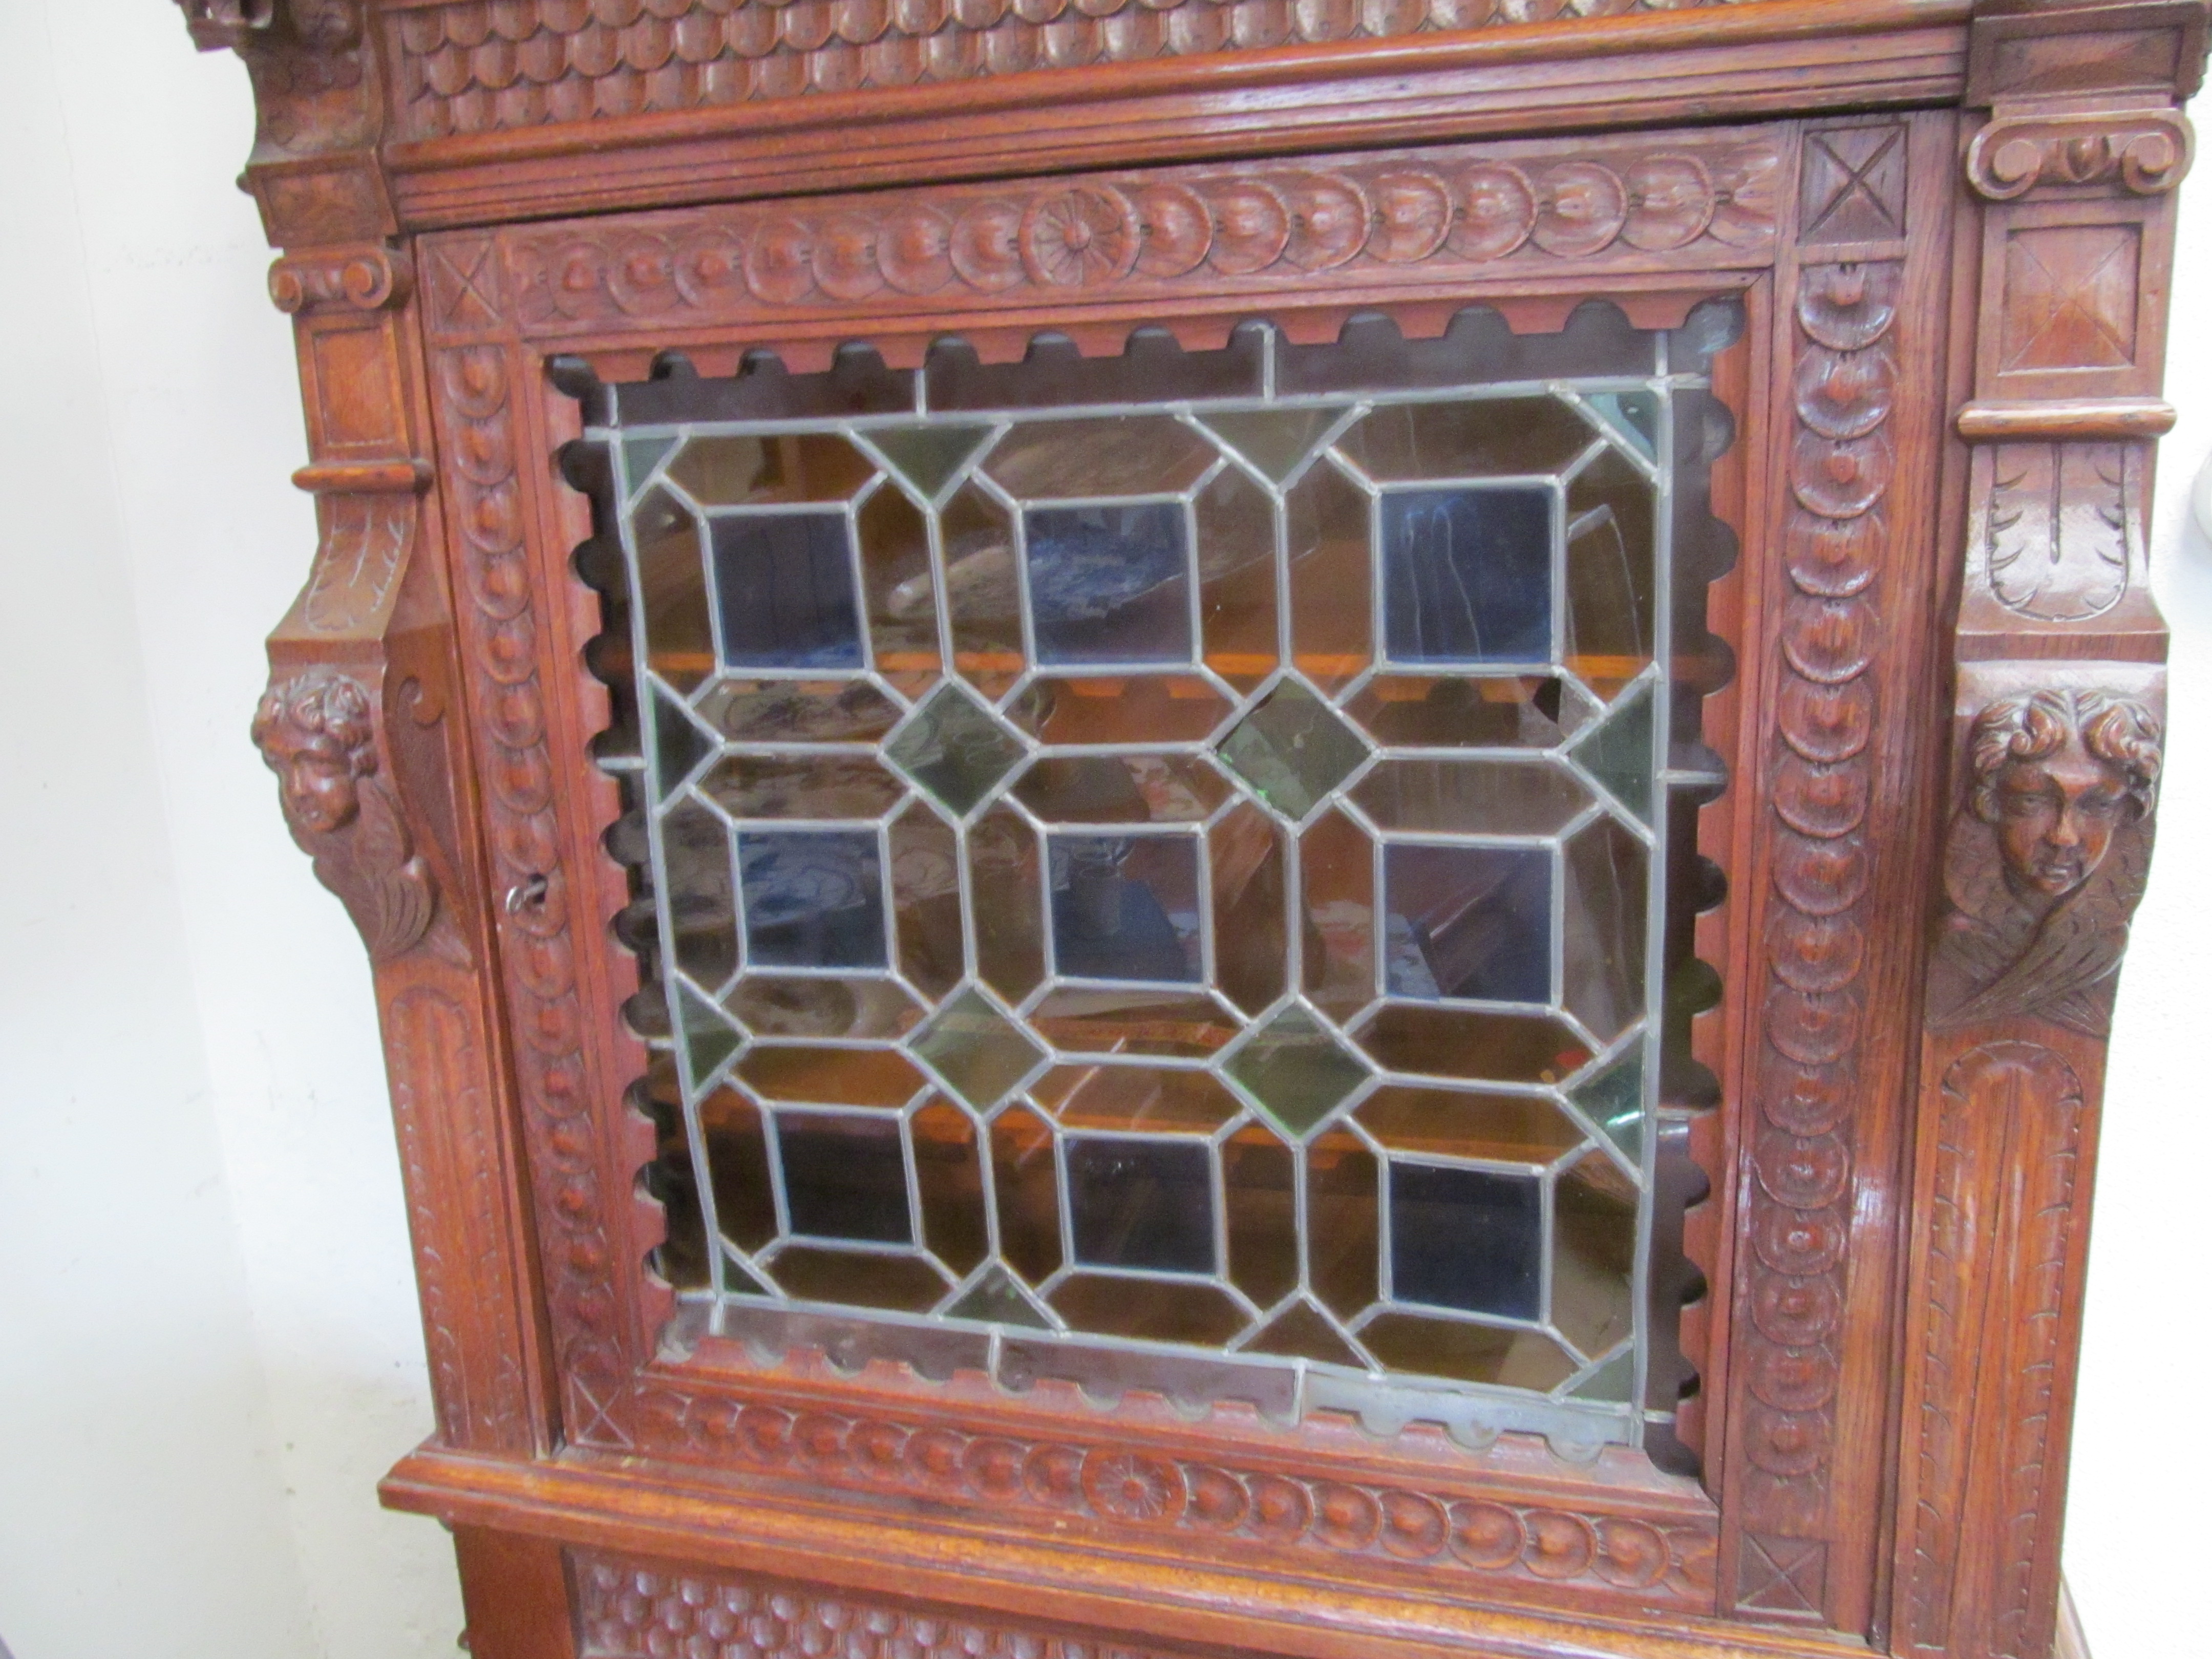 A continental oak cabinet with carved decoration, stained glass upper door and panelled door - Image 3 of 3